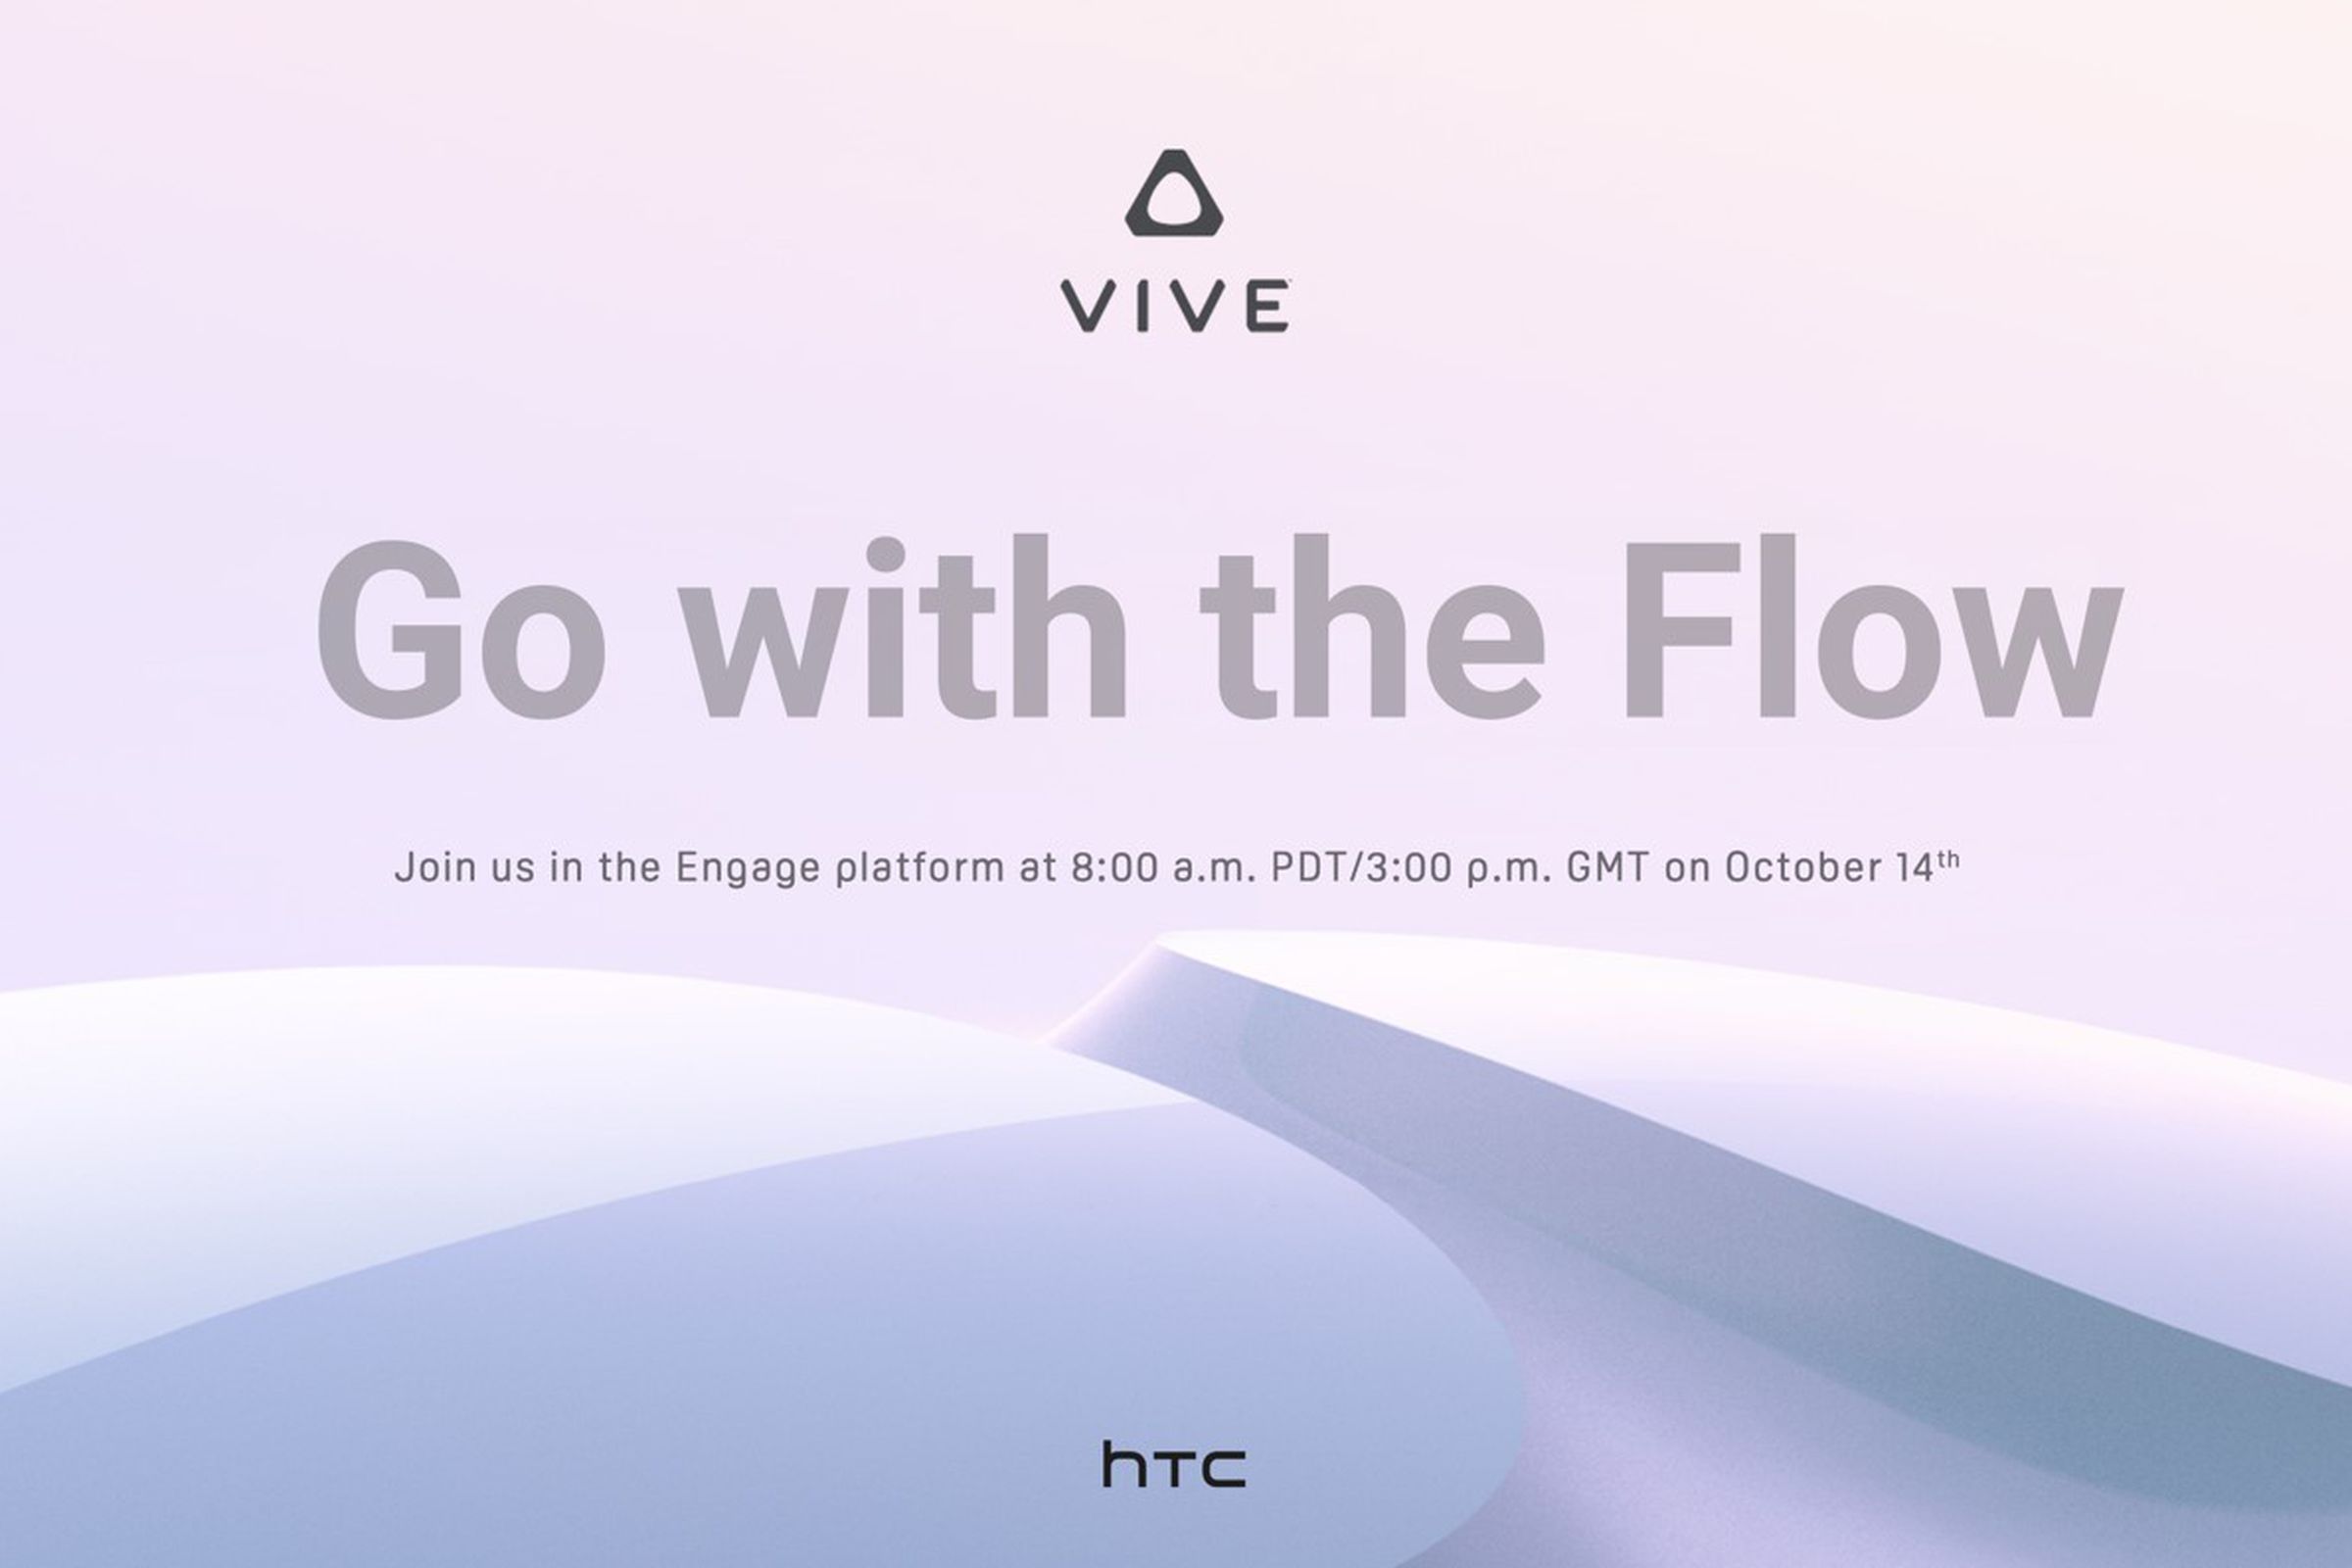 A promotional image for HTC’s upcoming event.